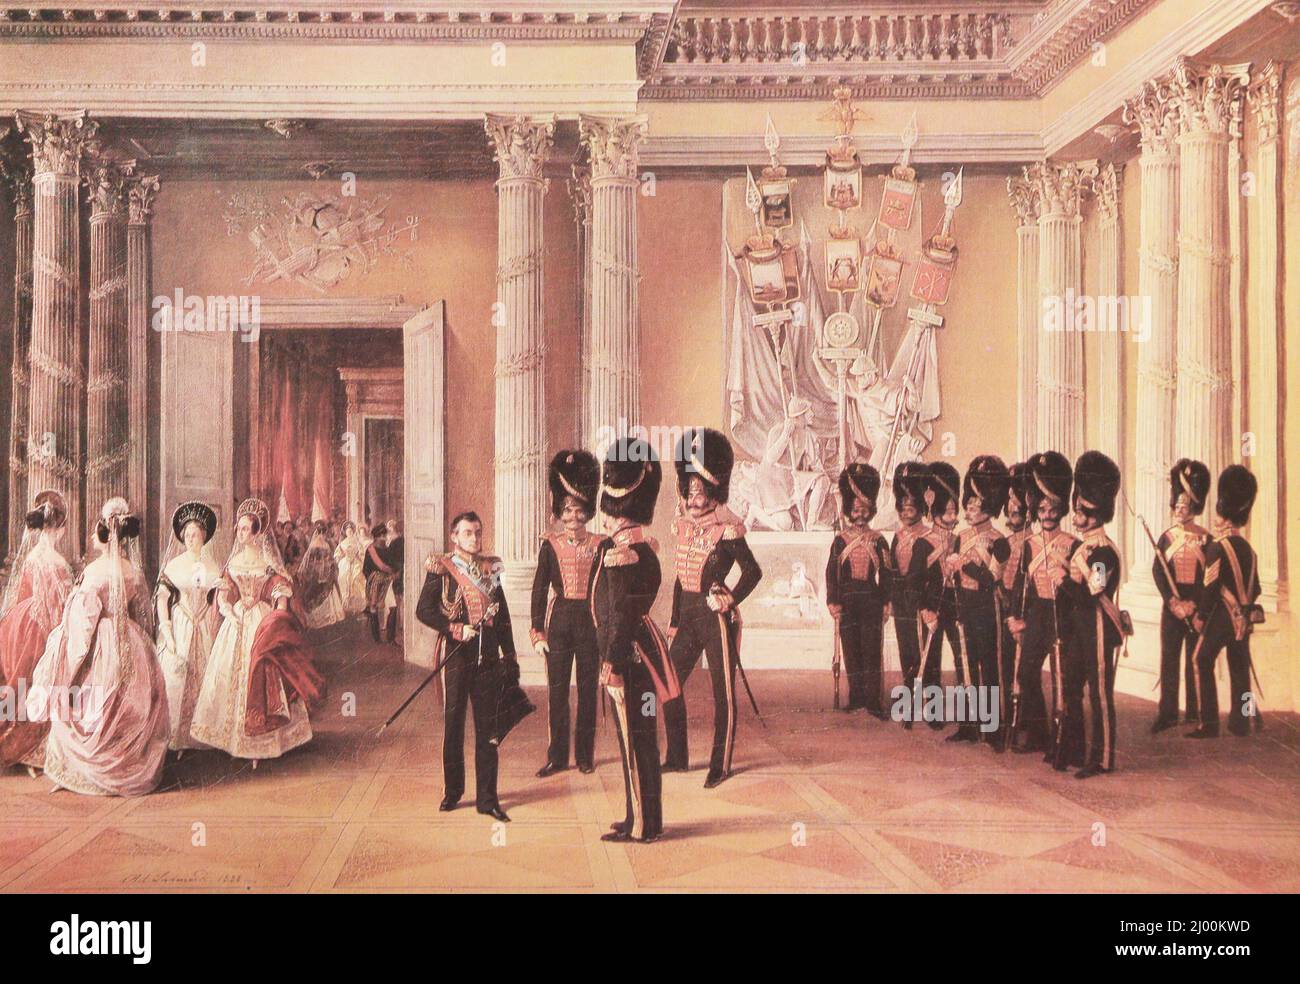 The Armorial Hall of the Winter Palace in St. Petersburg. Painting from 1834. Stock Photo